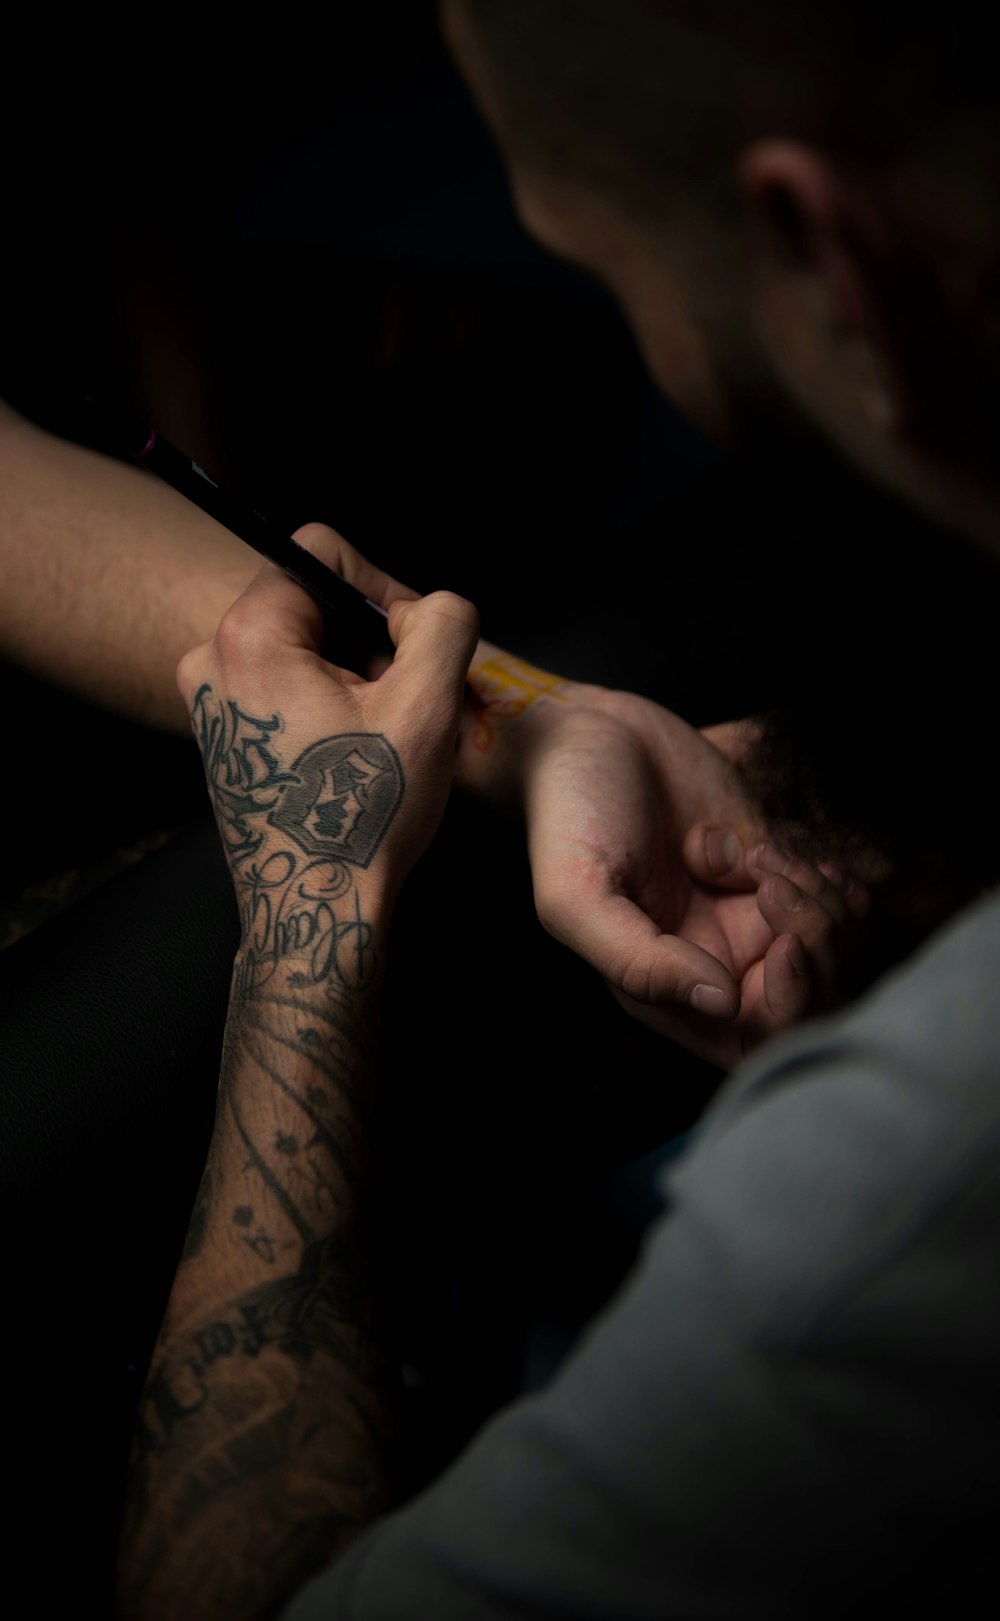 man's tattooing person's hand